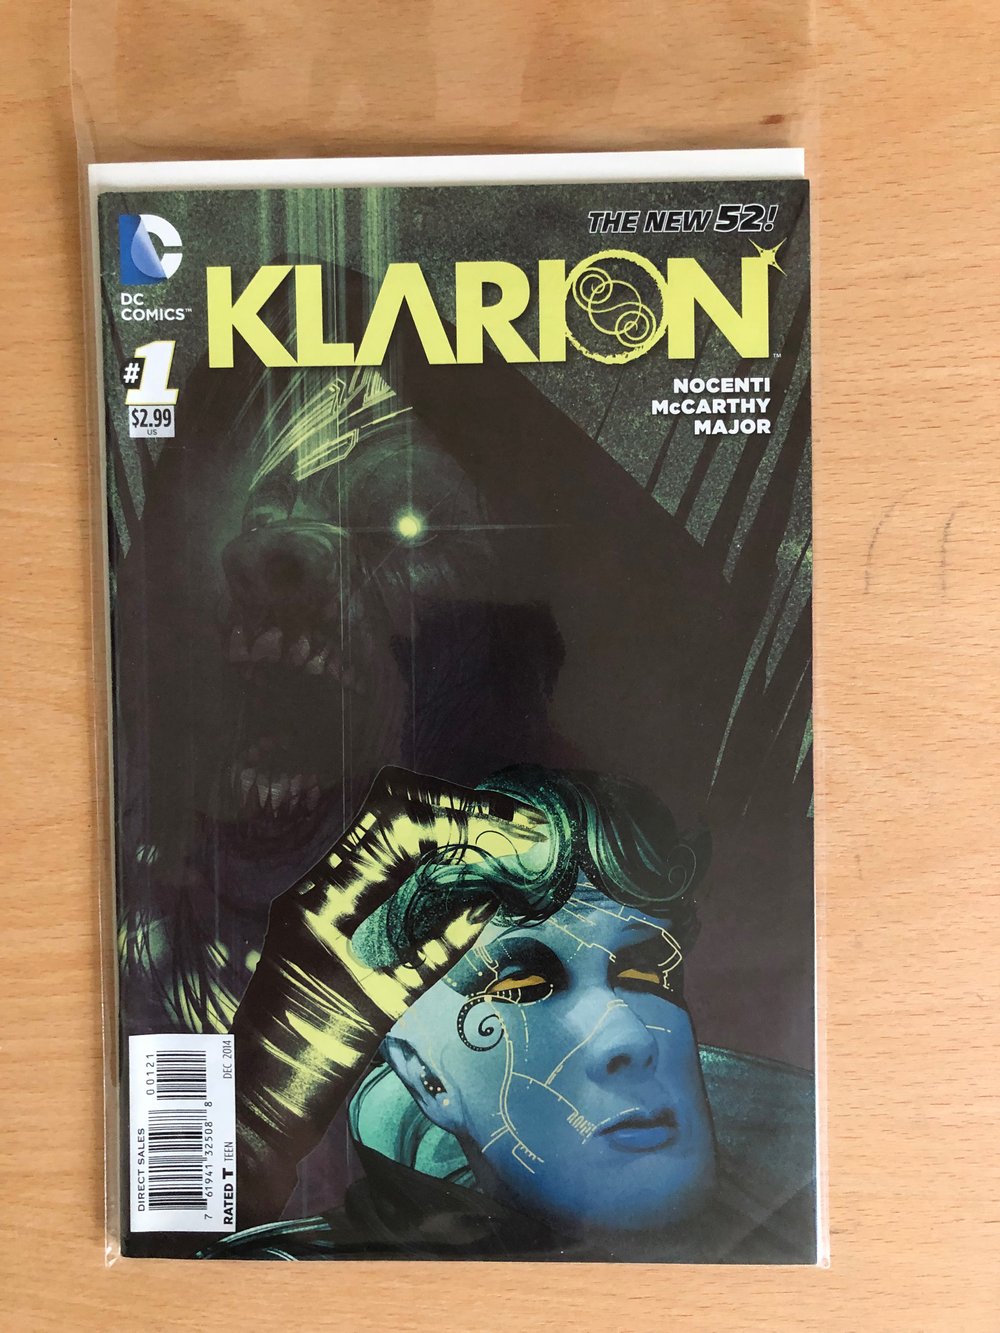 Image of Klarion issue 1 (cover only)